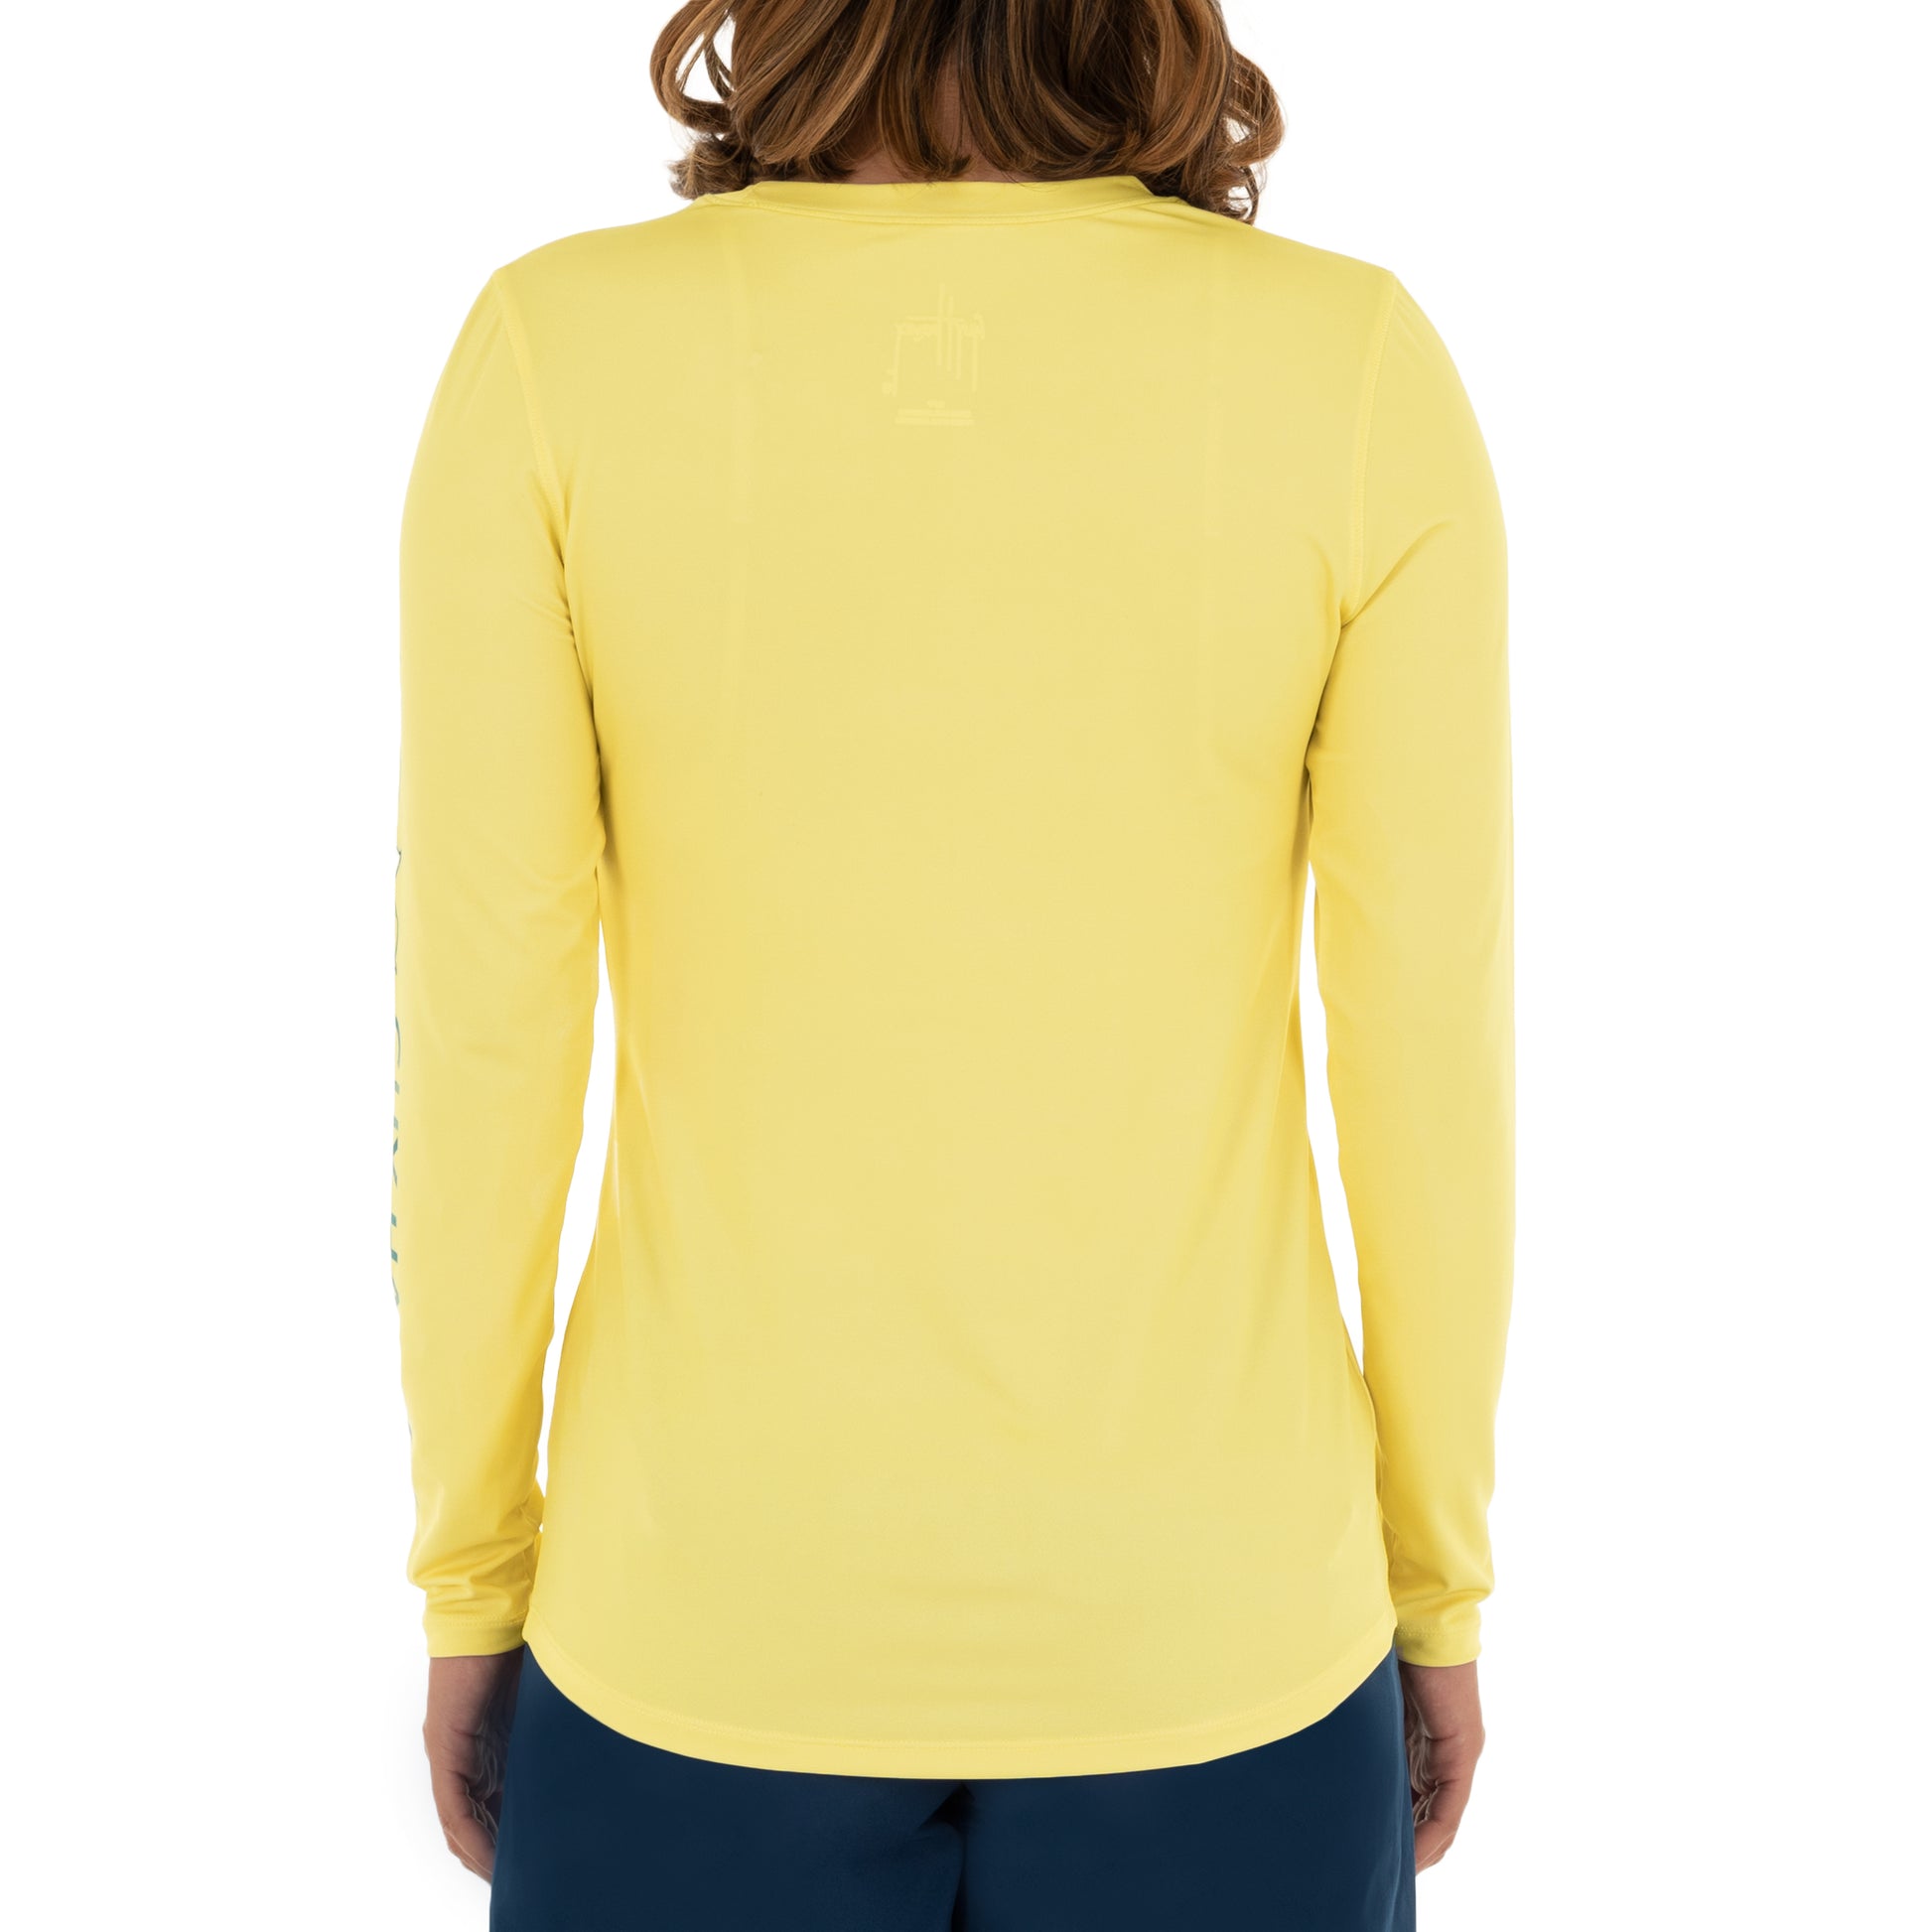 Ladies Core Solid Yellow Sun Protection Top View 4